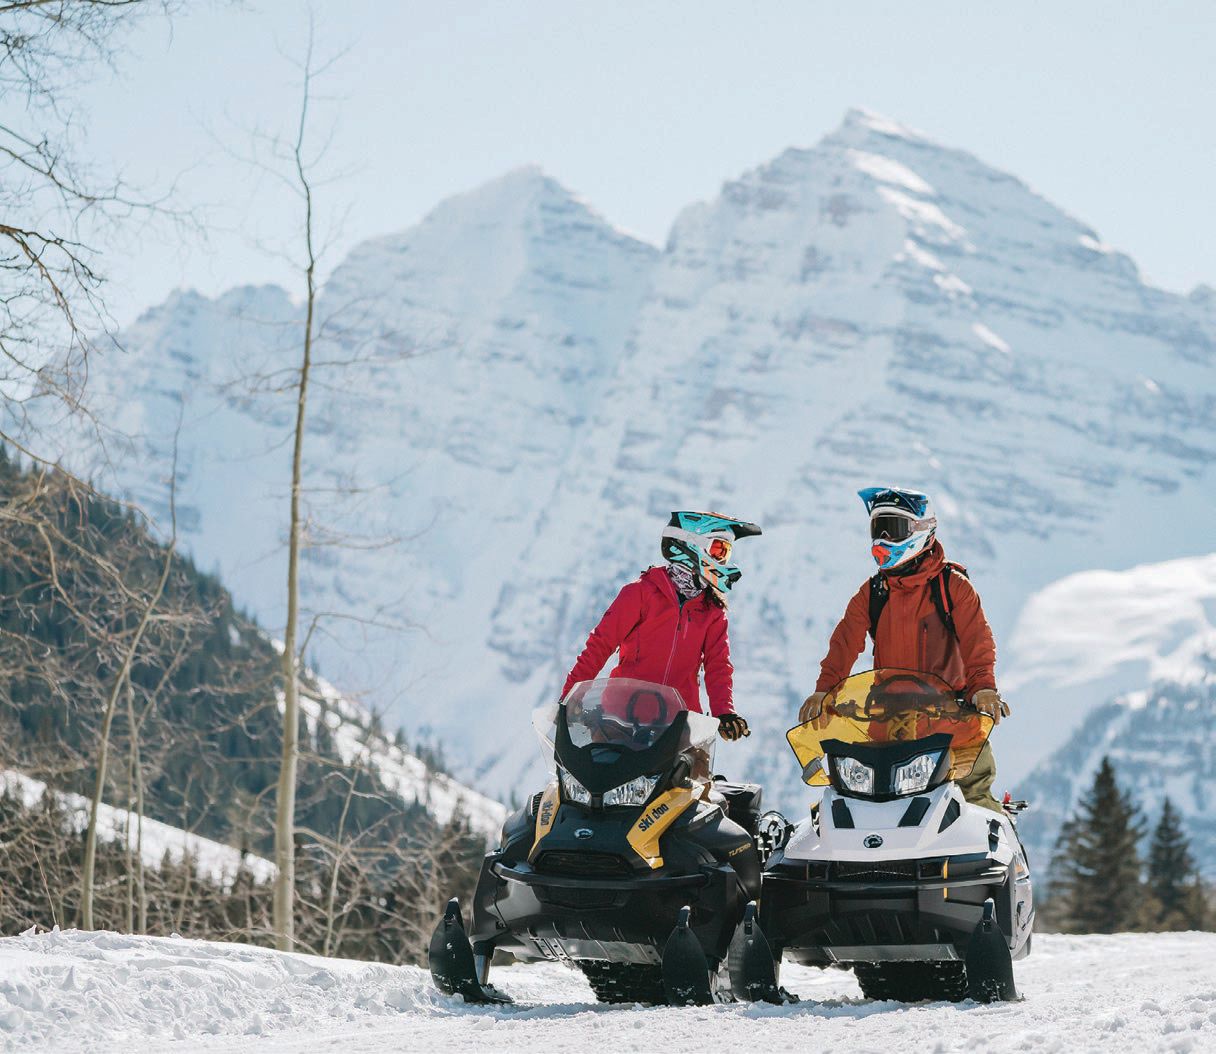 Get outside with snowmobiling, skiing and snowboarding in Snowmass PHOTO BY: TAMARA SUSA